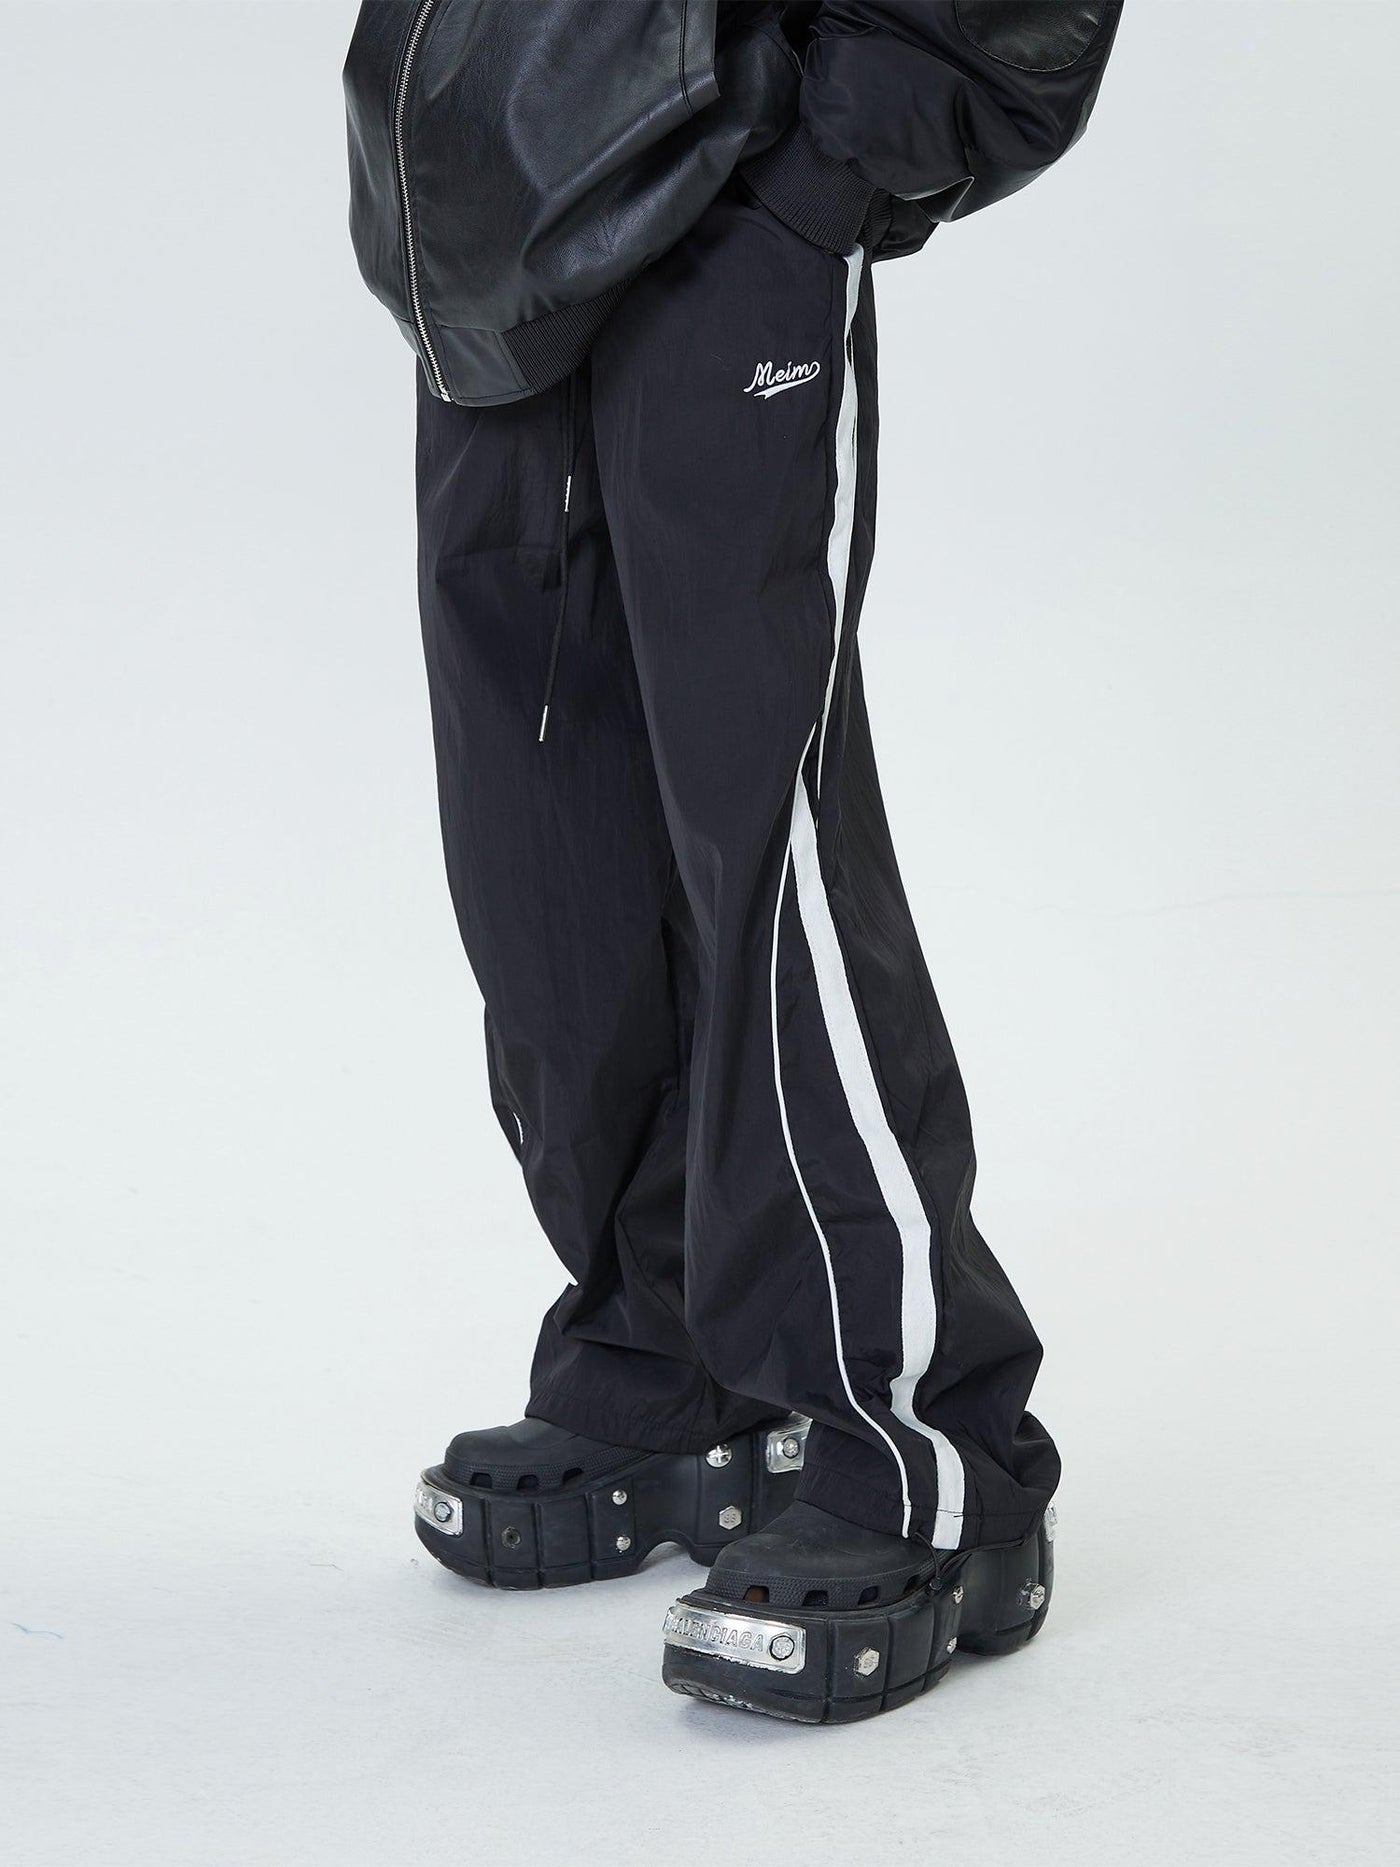 Striped Embroidery Track Pants Korean Street Fashion Pants By Ash Dark Shop Online at OH Vault